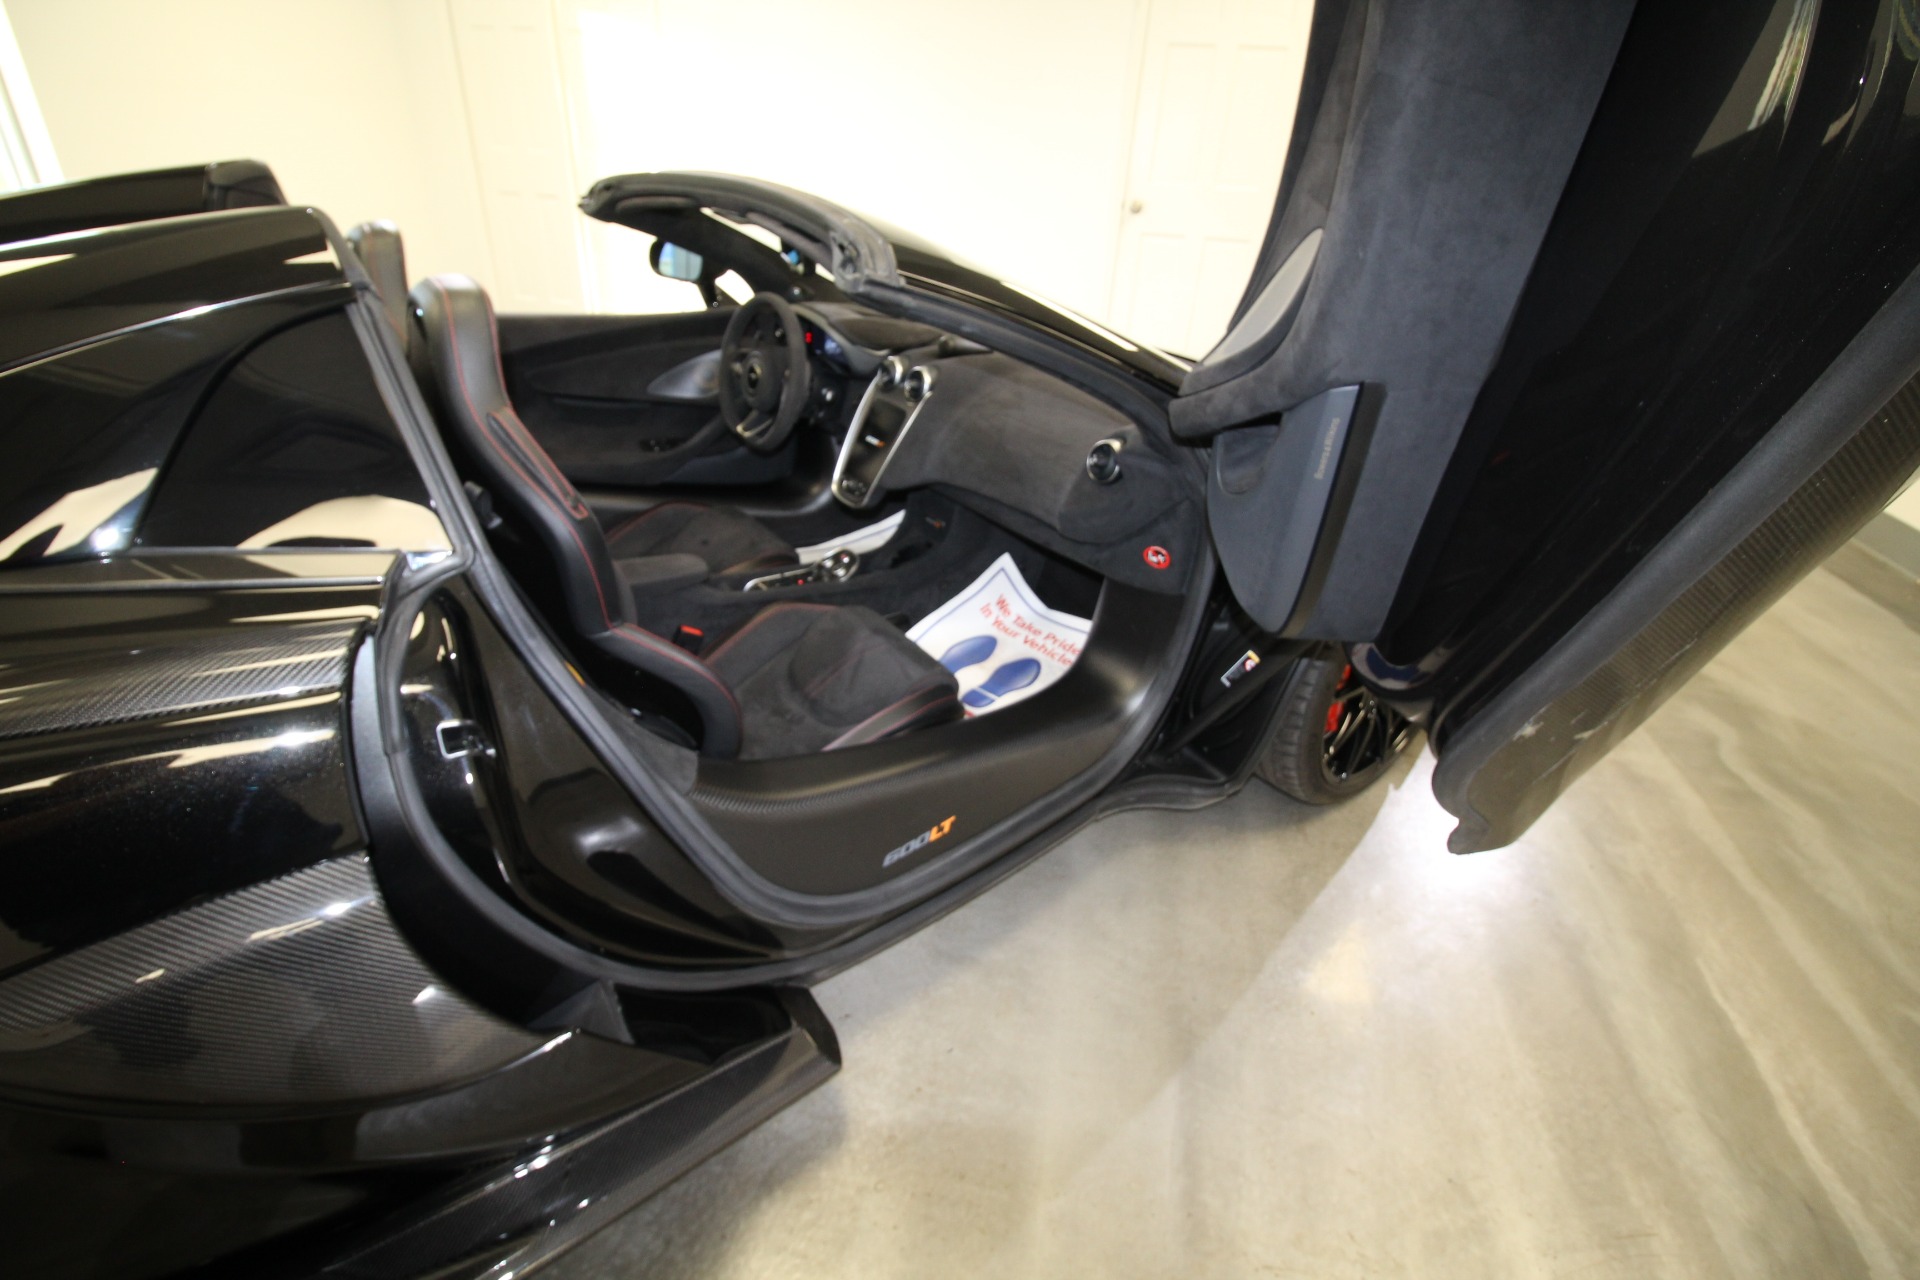 Used 2020 Onyx Black McLaren 600LT Spider Lots of Carbon Fiber - Low Miles | Albany, NY